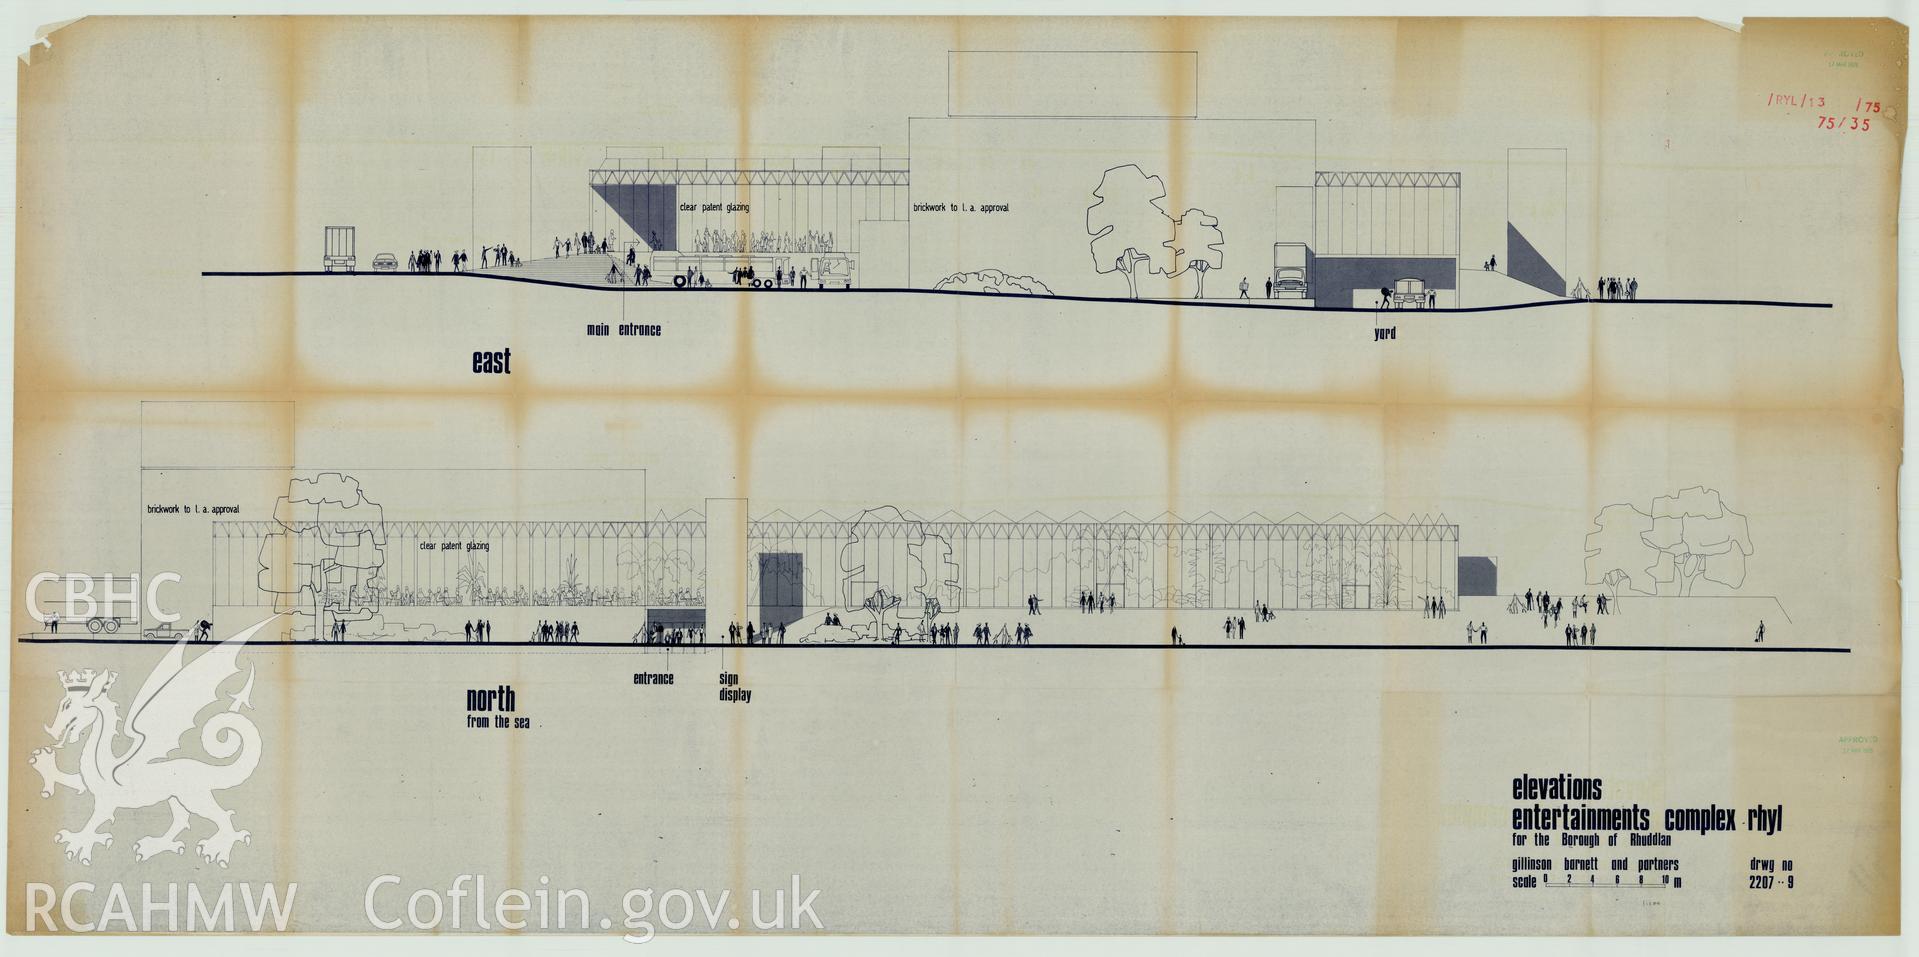 Digital copy of a measured drawing showing elevations of the Sun Centre, Rhyl, produced by Gillinson Barnett and Partners, 1975. Loaned for copying by Denbighshire County Council.